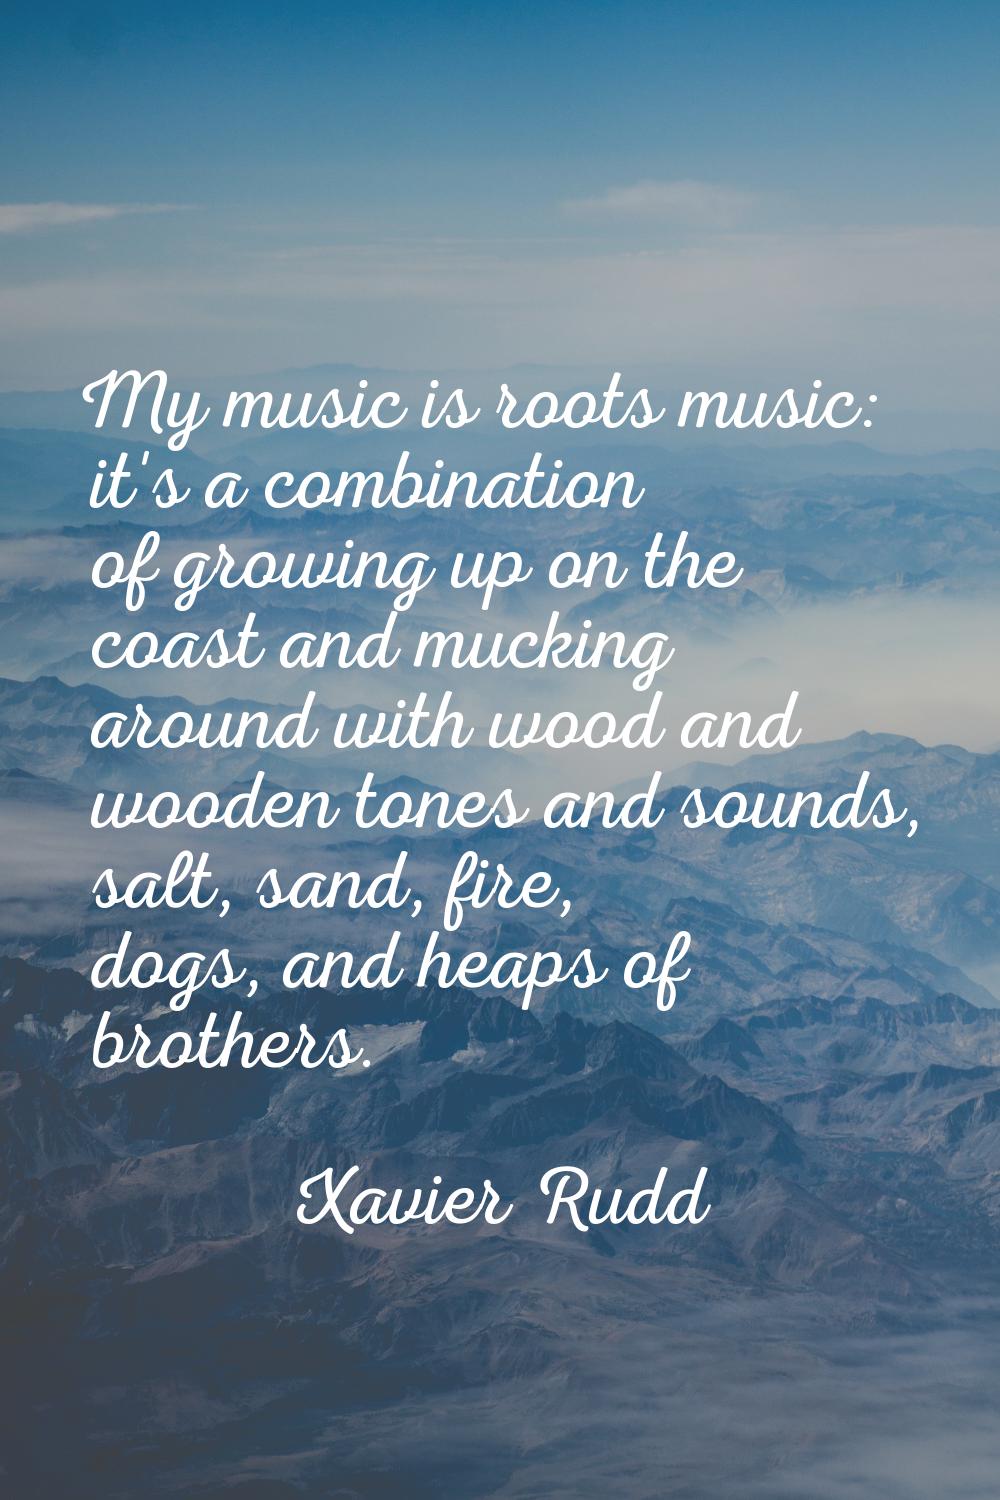 My music is roots music: it's a combination of growing up on the coast and mucking around with wood